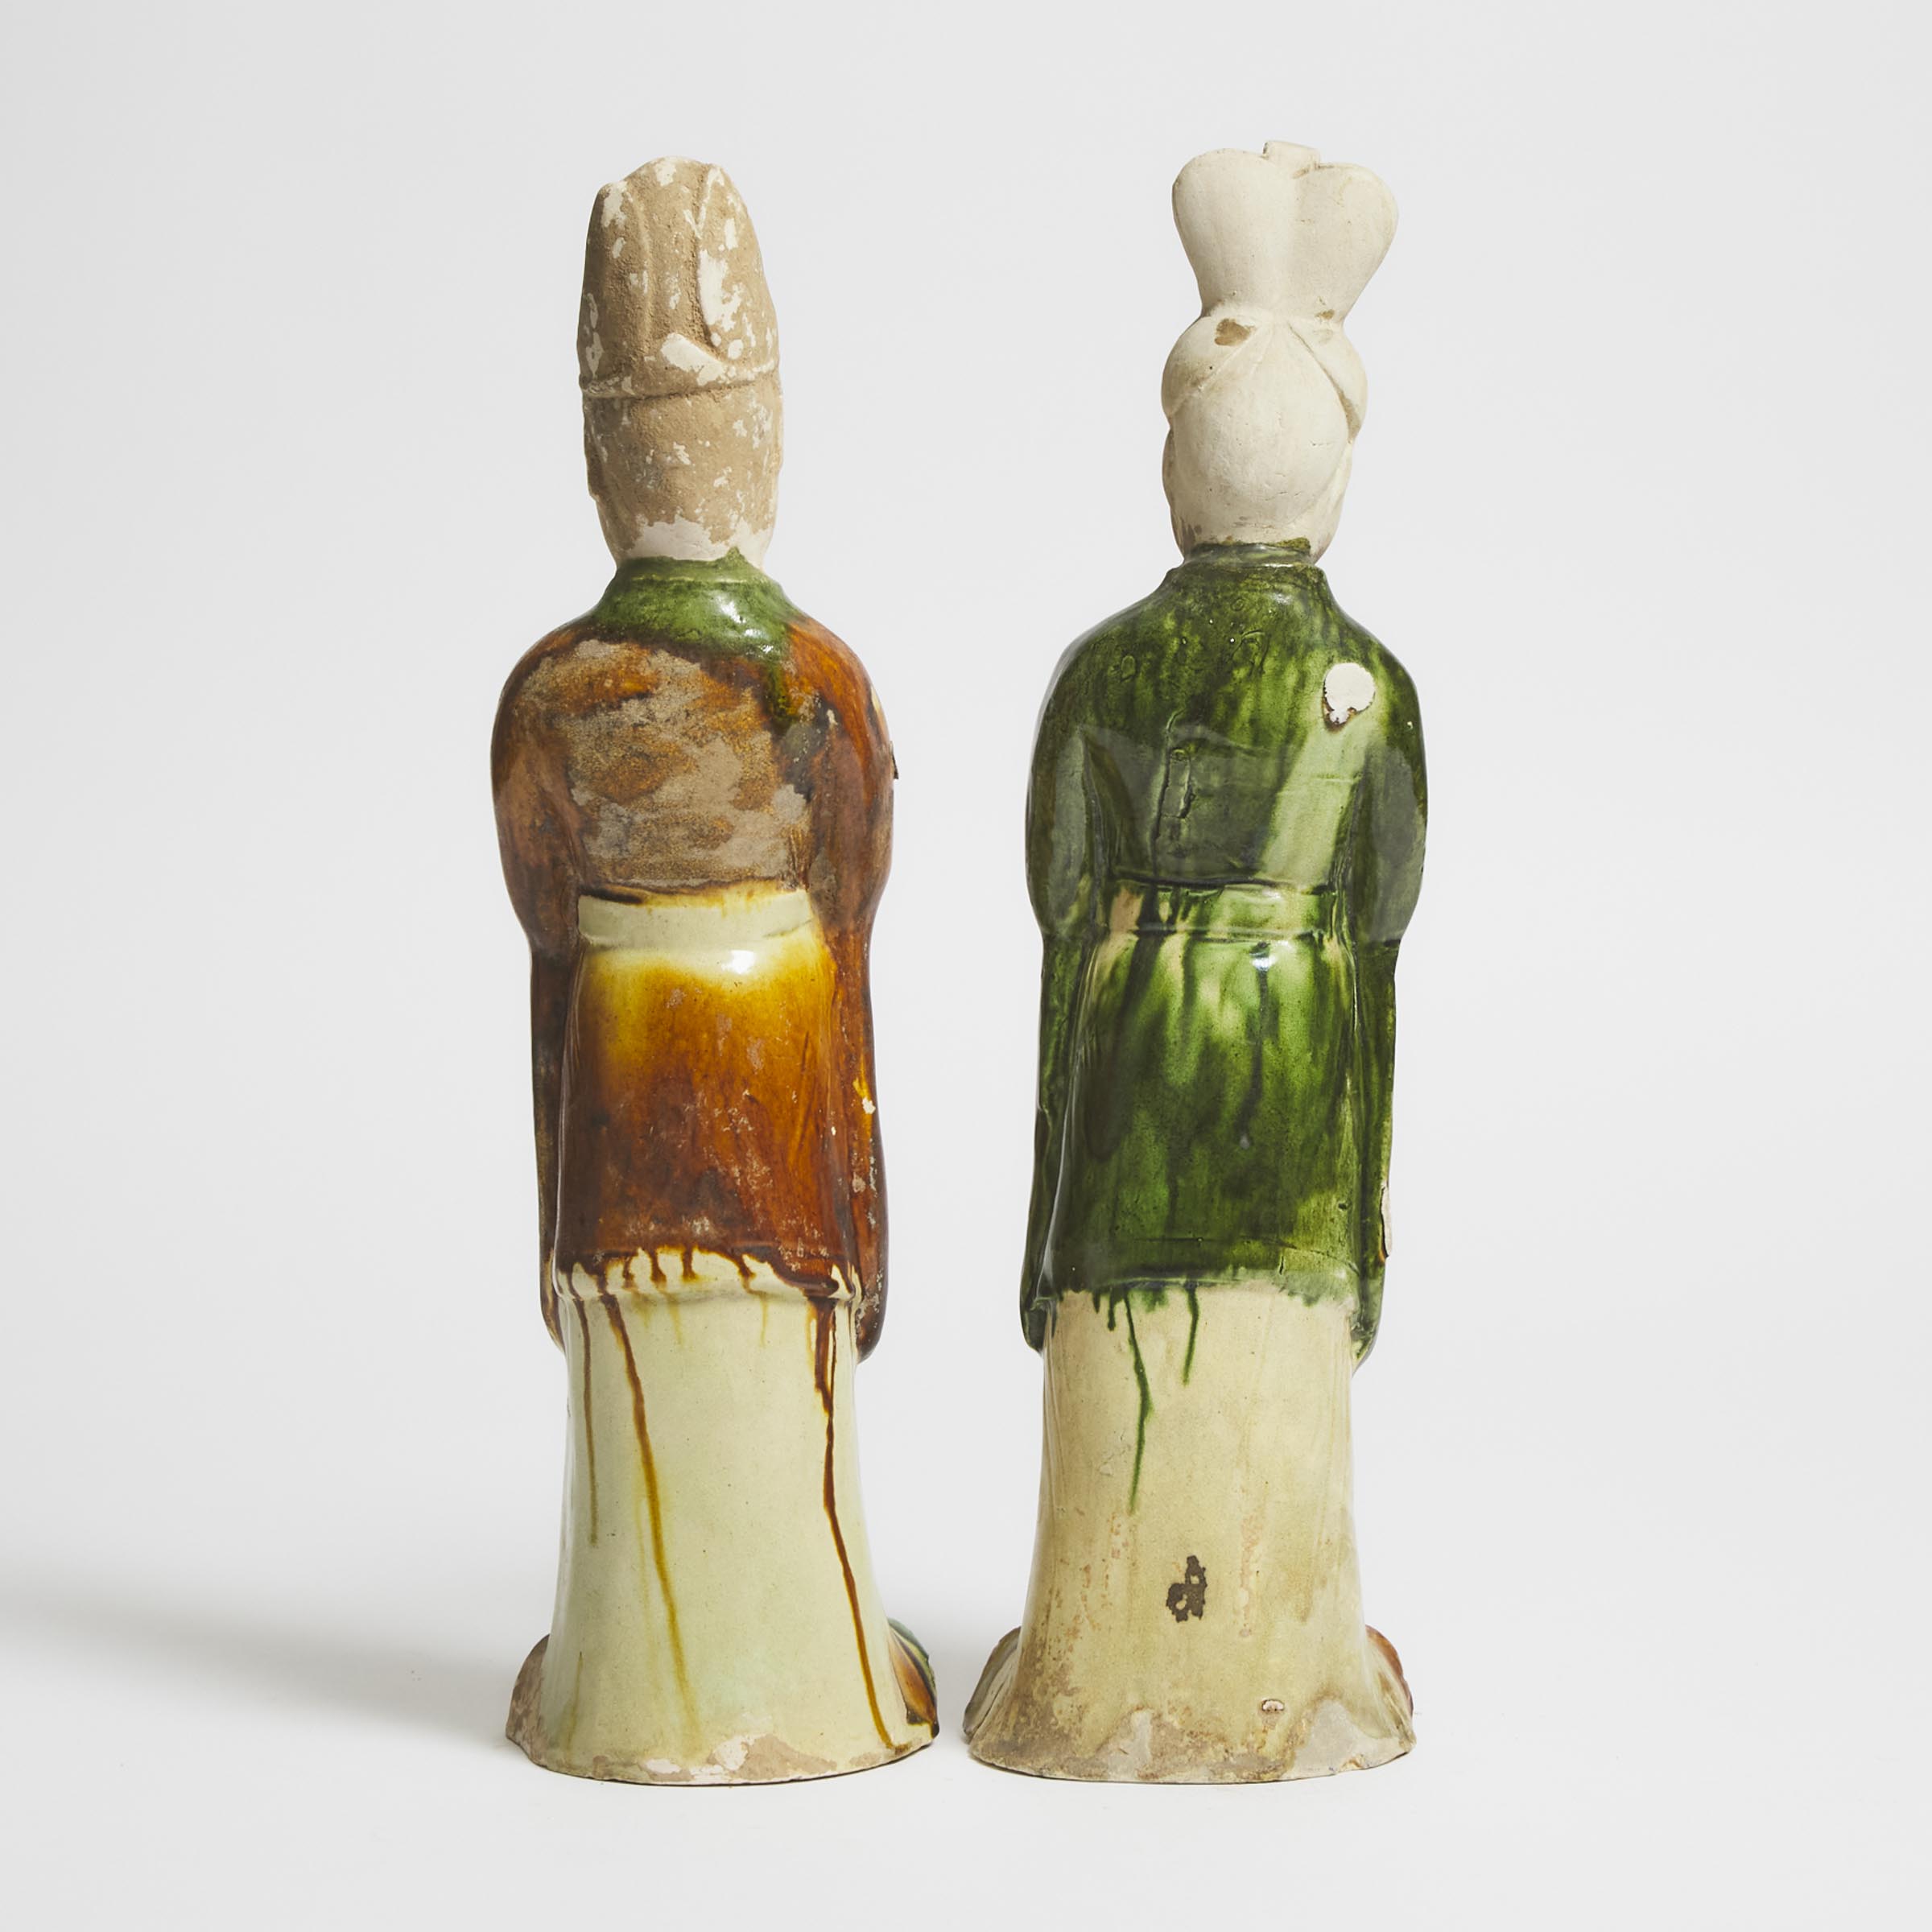 A Pair of Sancai-Glazed Pottery Figures of Attendants, Tang Dynasty (AD 618-907)